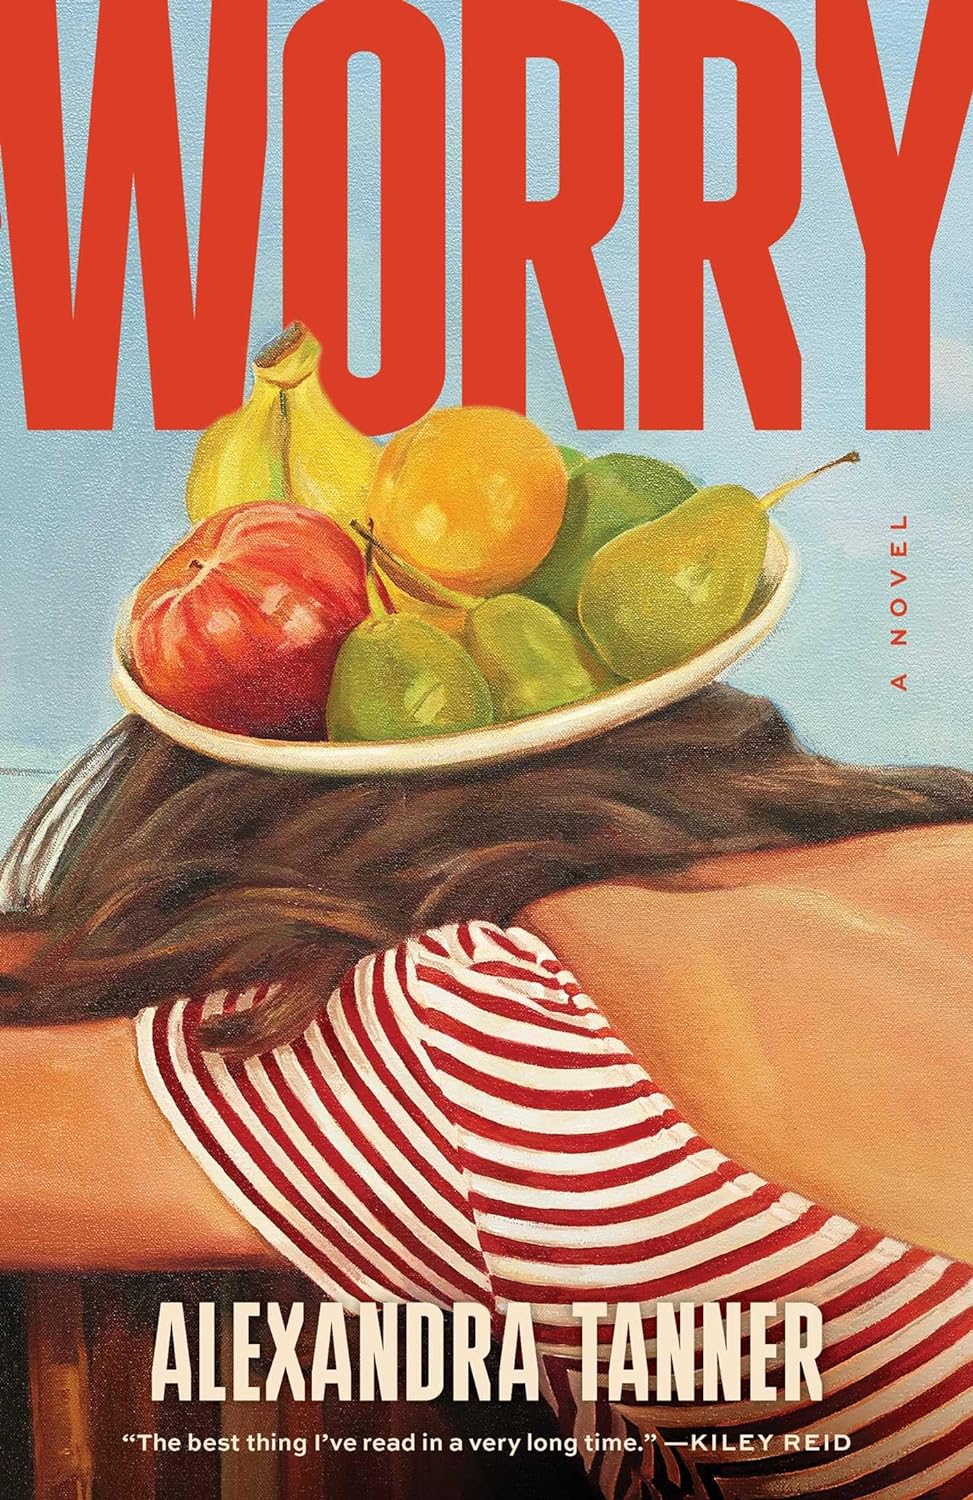 Image for "Worry"